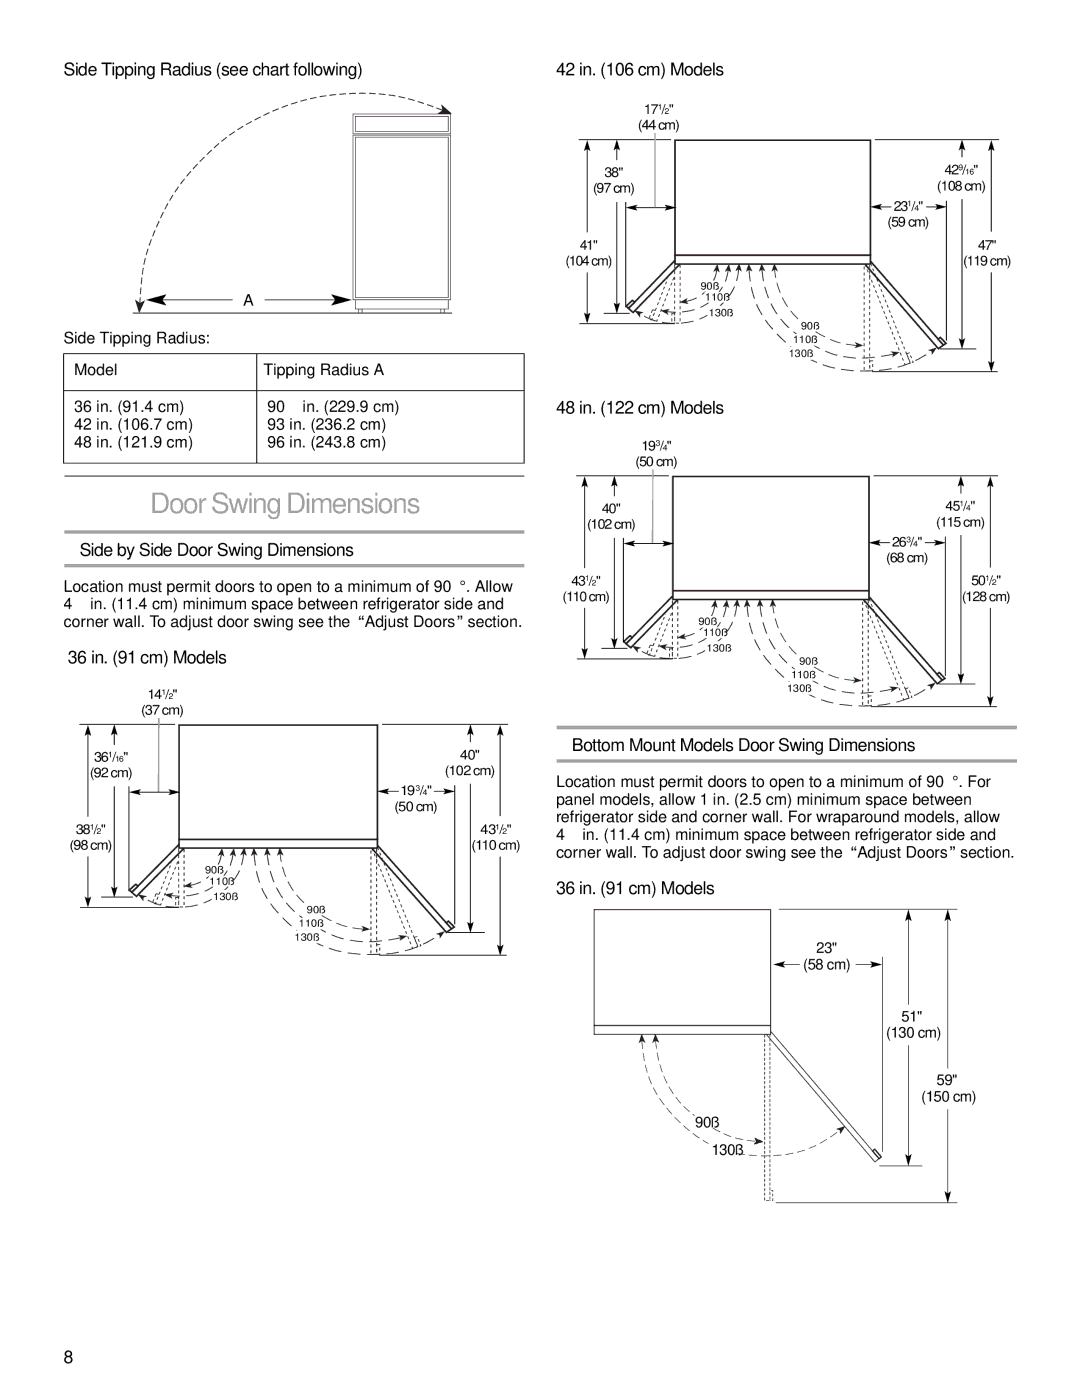 KitchenAid 2266877 manual Side Tipping Radius see chart following, Side by Side Door Swing Dimensions, Cm Models 